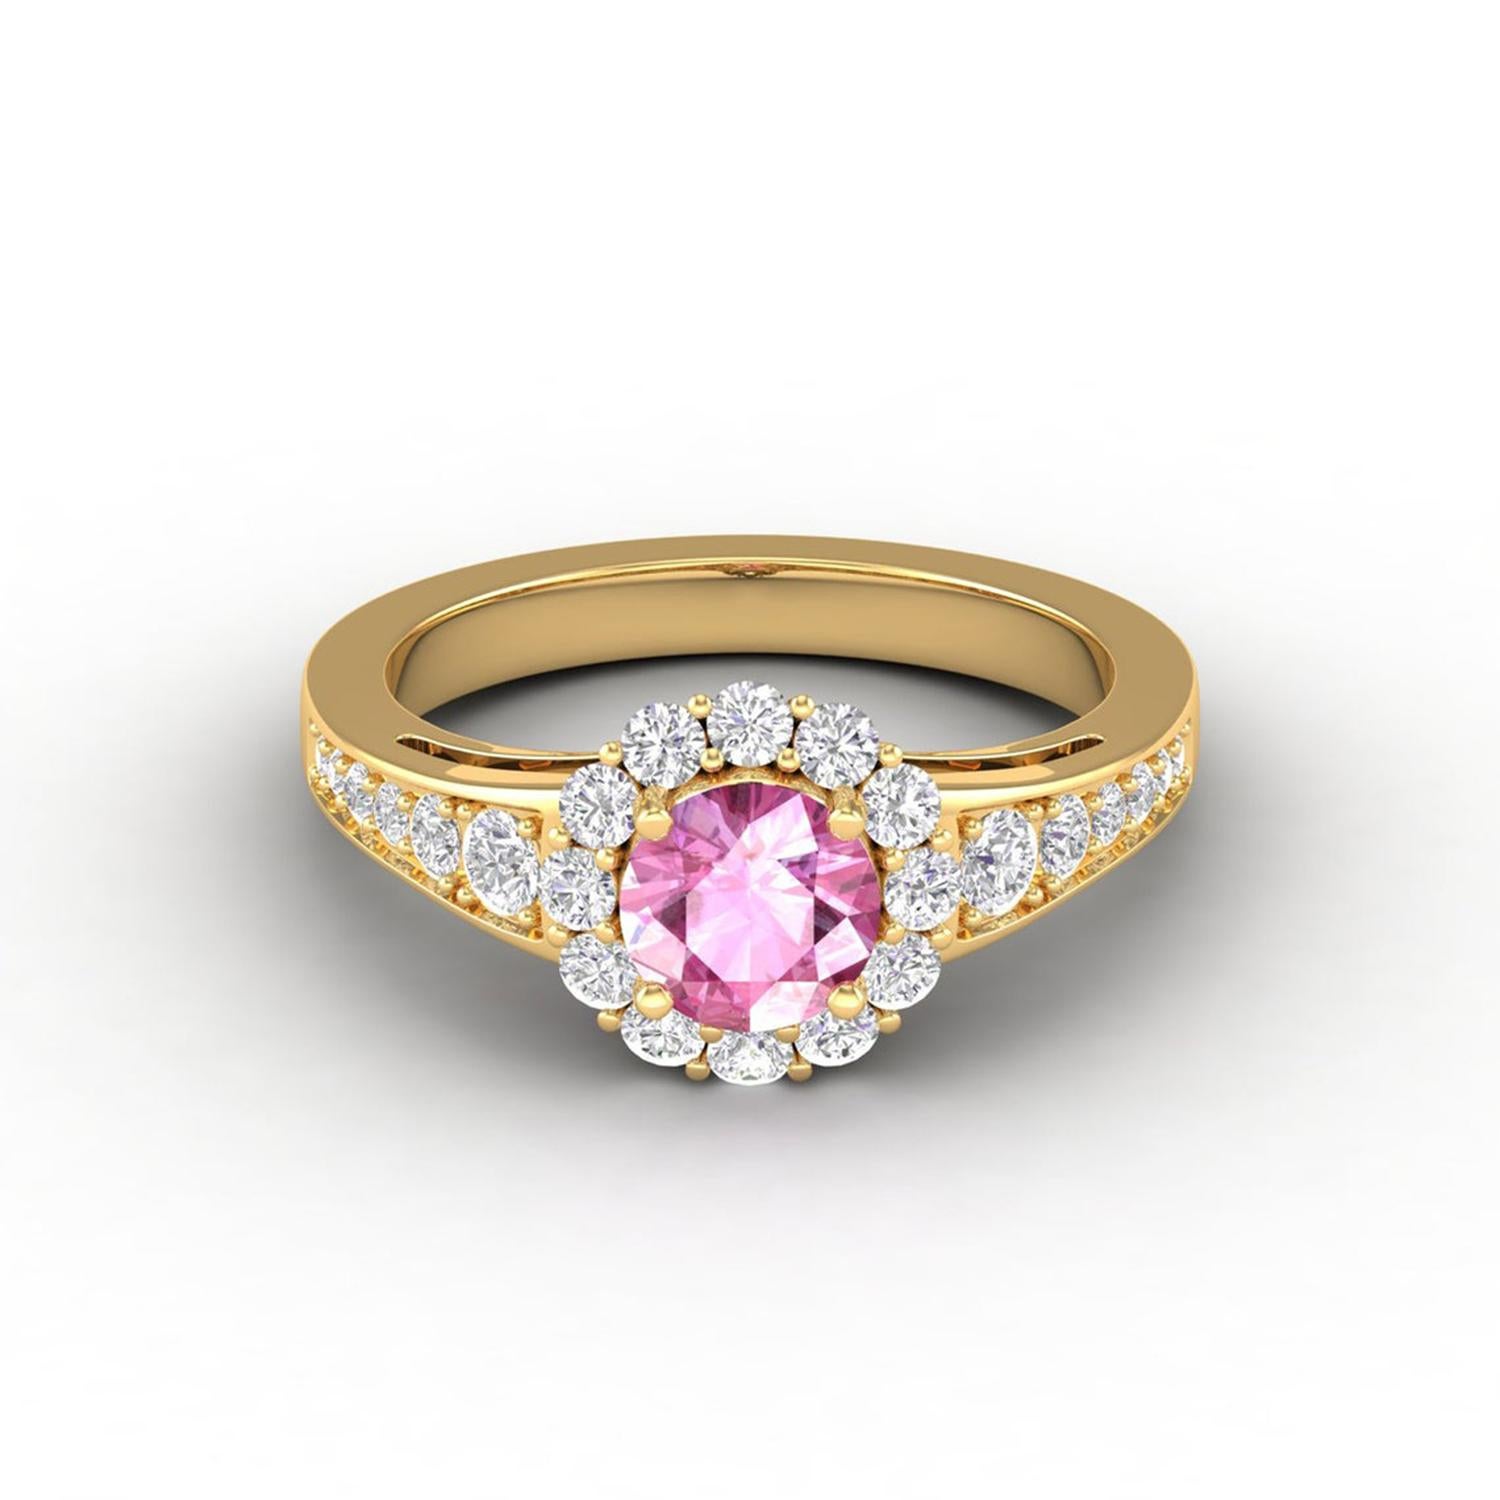 14 Karat Gold Sapphire Ring / Round Diamond Ring / Solitaire Ring For Sale 1